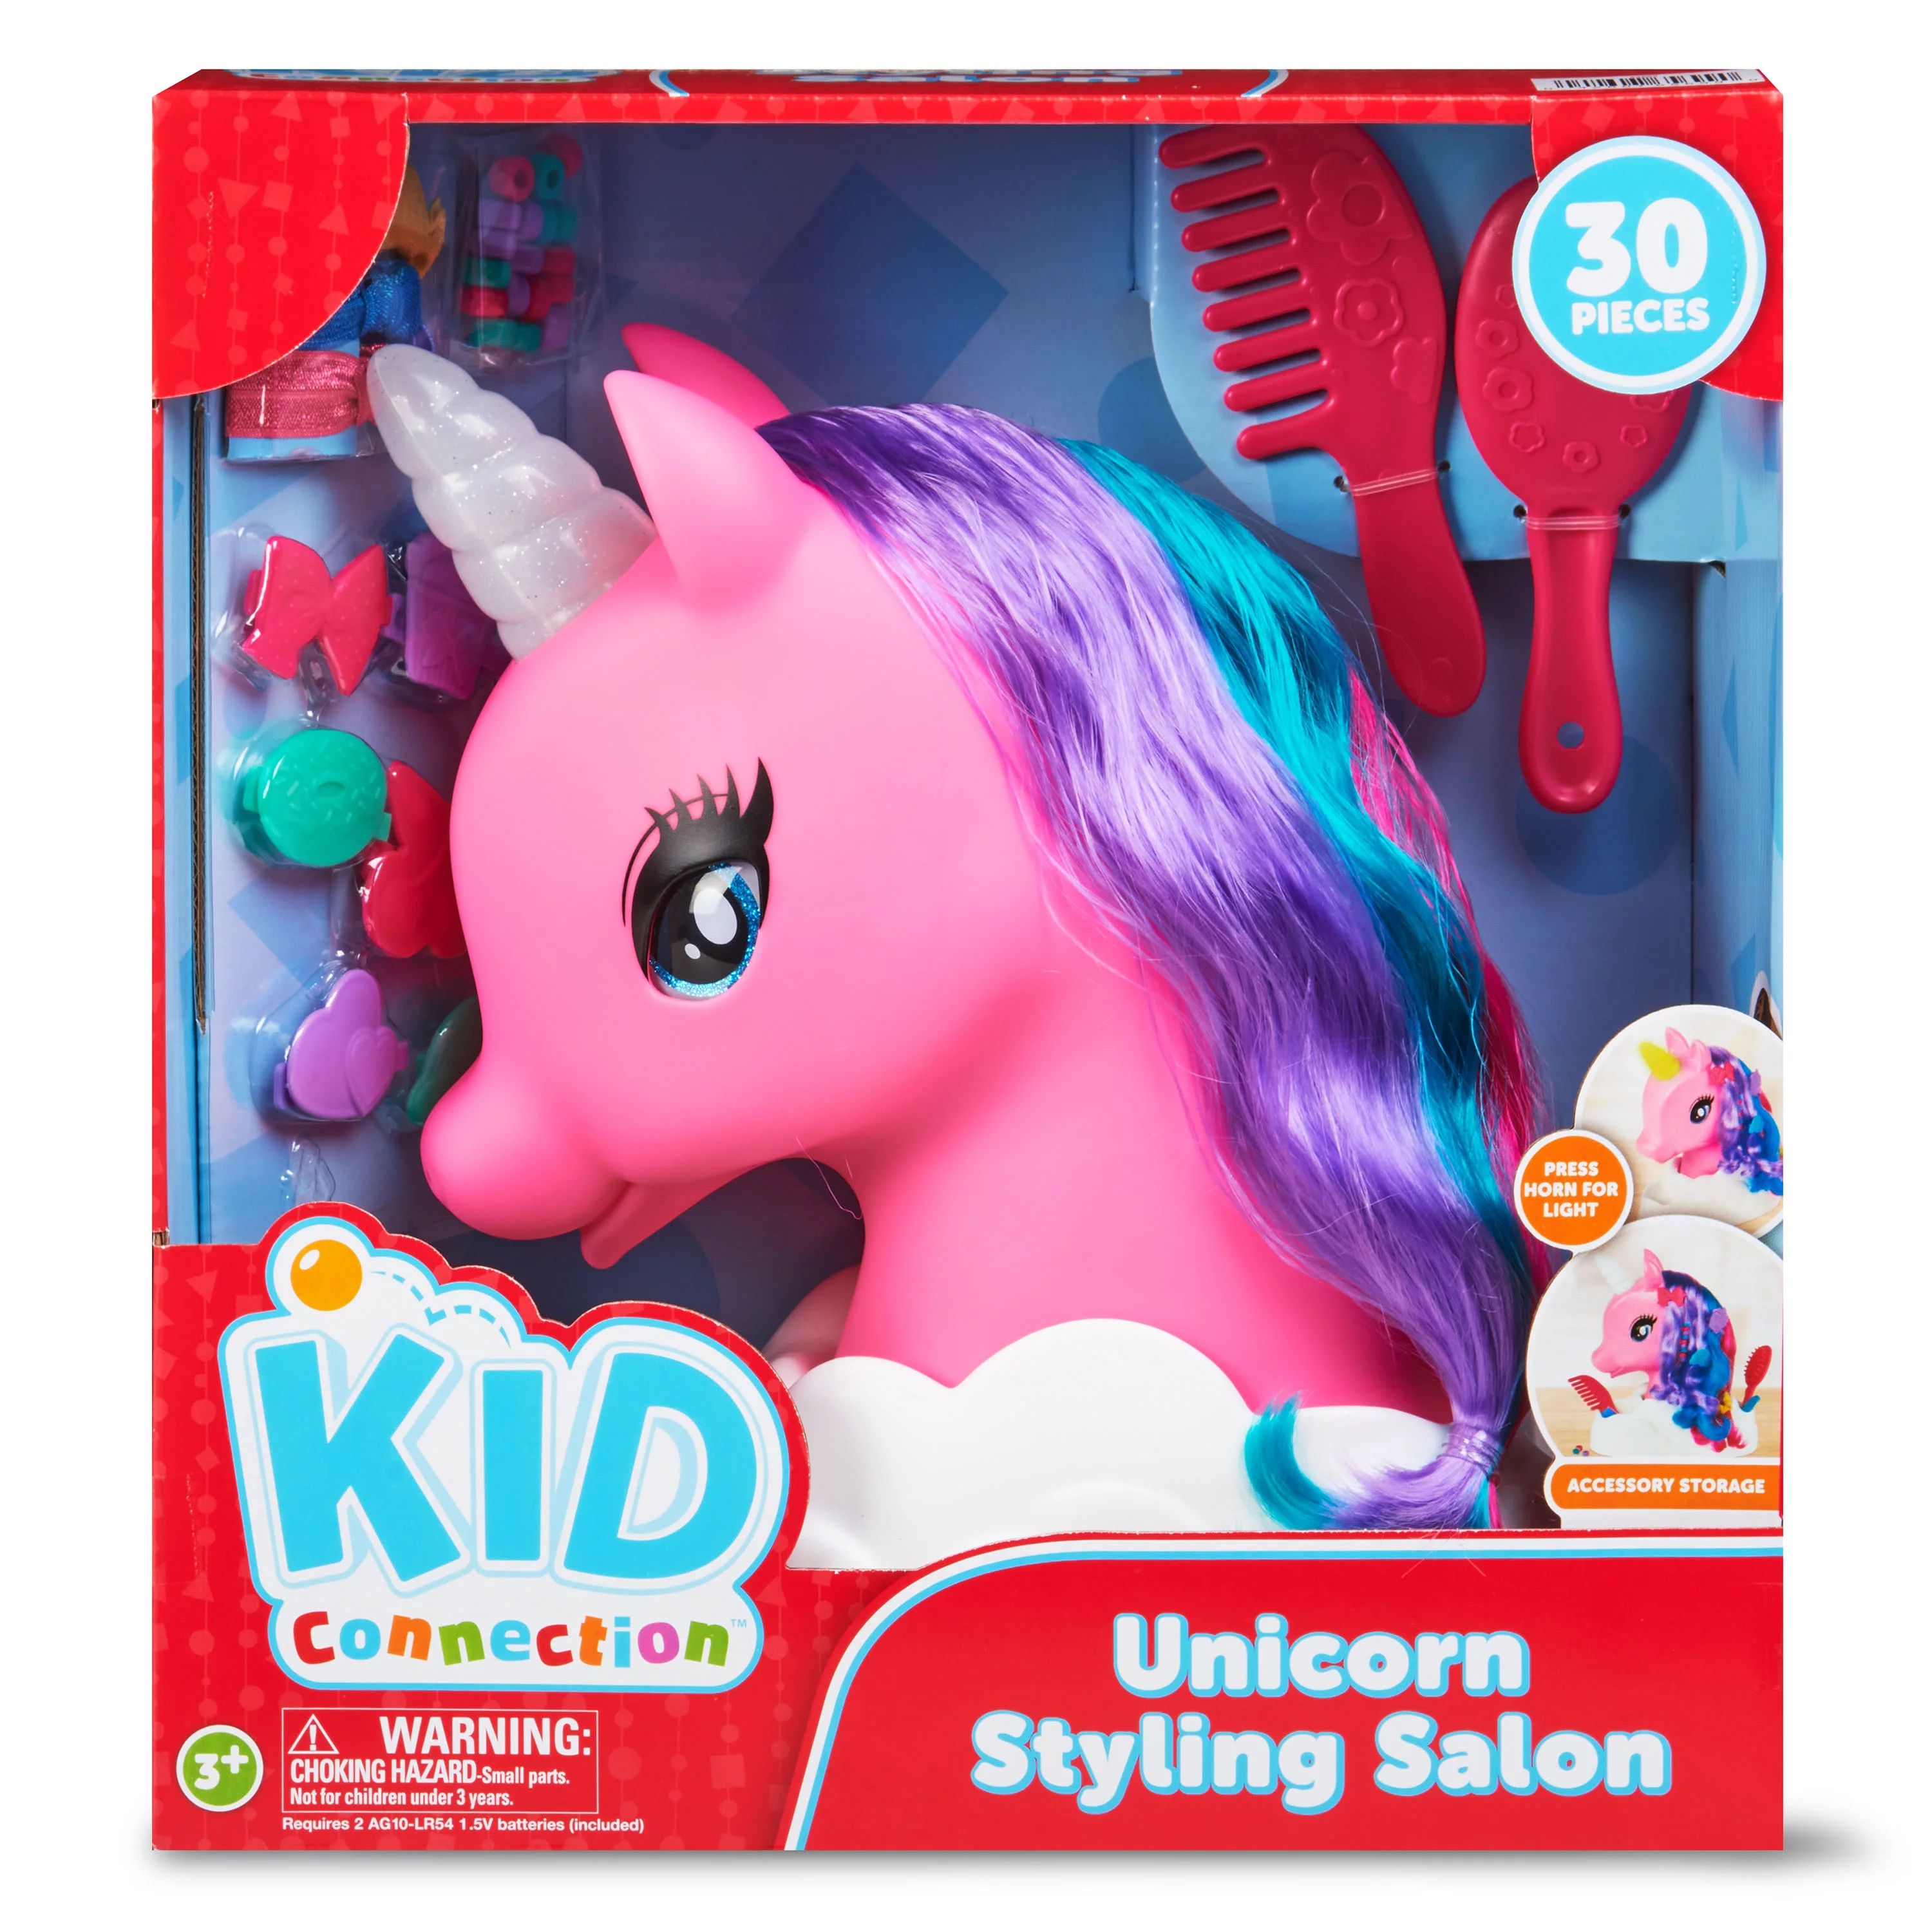 Kid Connection Unicorn Styling Head Toy Play Set, Blue Eyes, Multi-color Hair | Walmart (US)